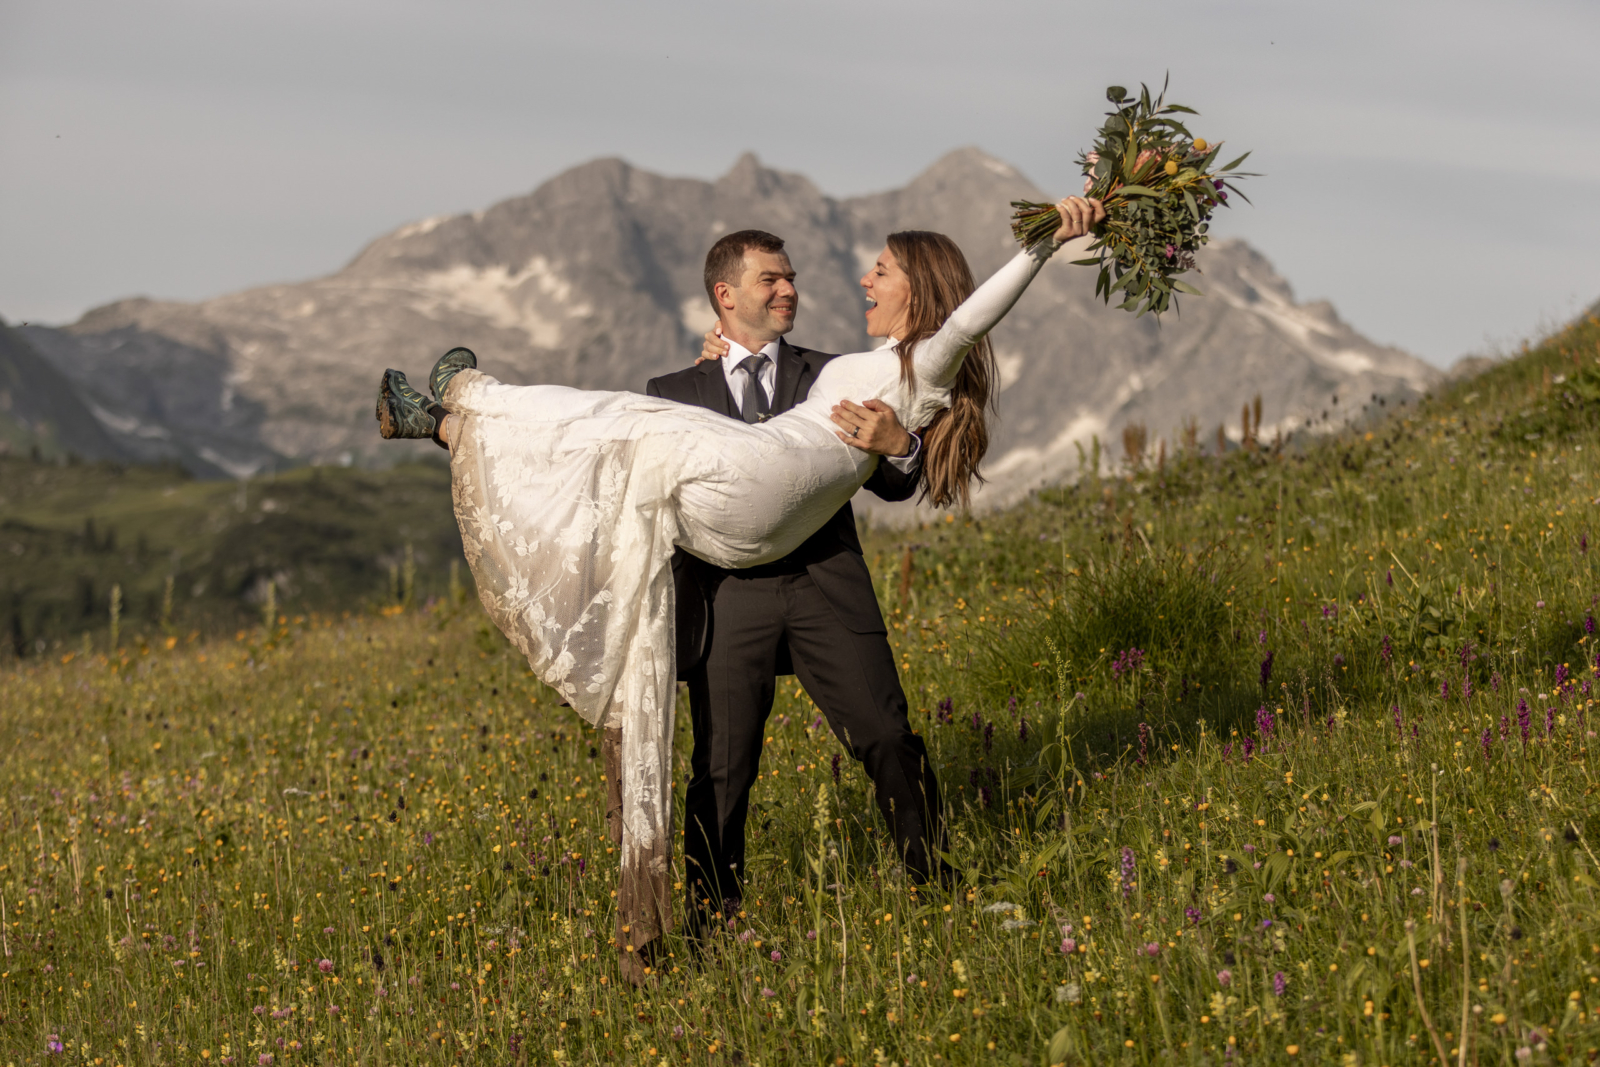 Romantic Wedding Amidst the Blooming Wildflowers in the Alps